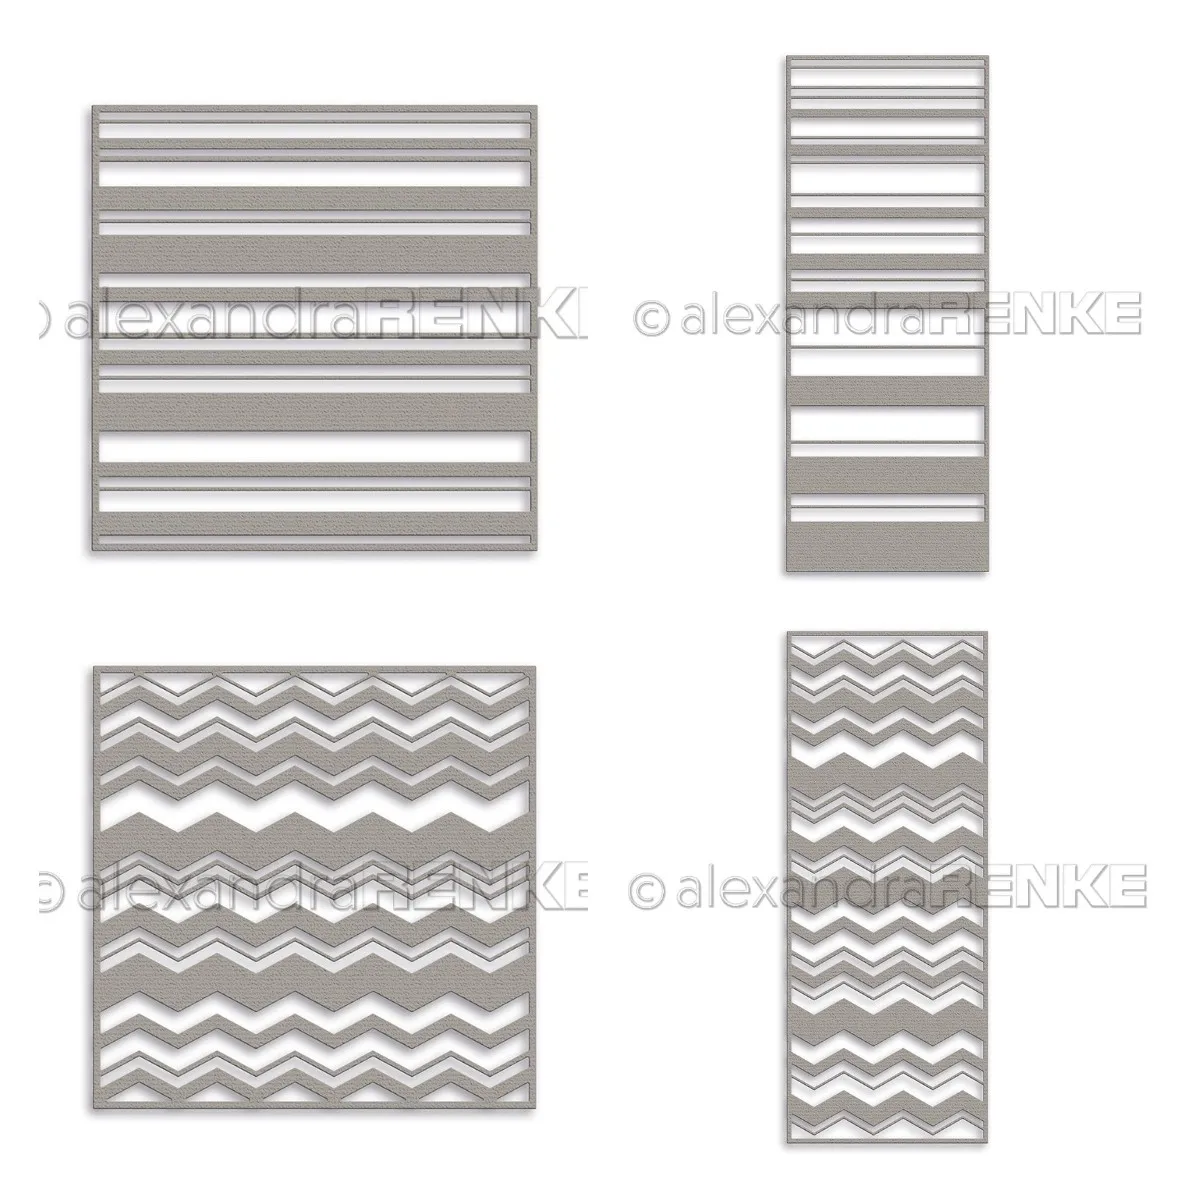 

Stripes Are Wavy Metal Cutting Dies For Diy Scrapbooking Crafts Maker Photo Album Template Handmade Decoration 2022 New